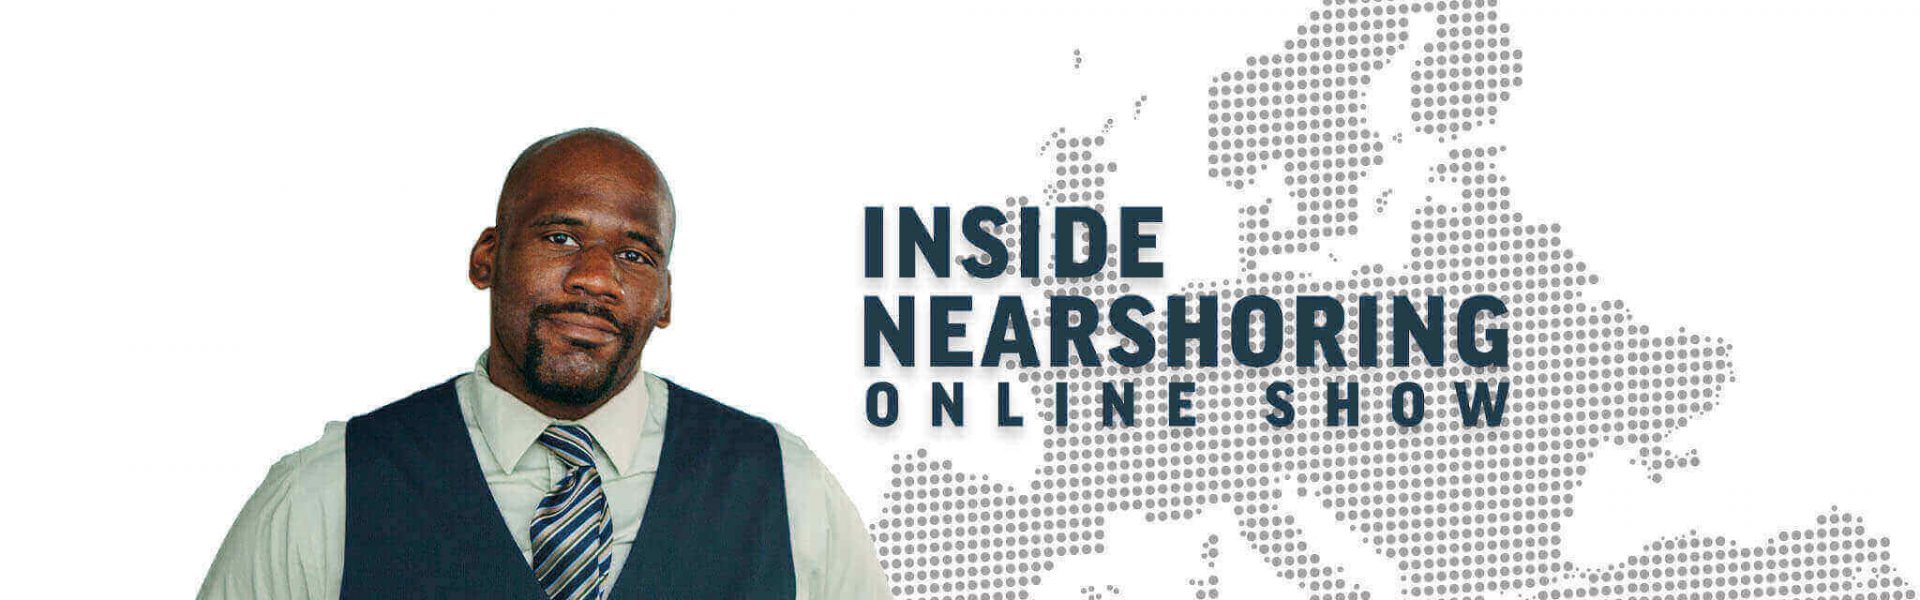 interview with cyril samovskiy on inside nearshoring online show